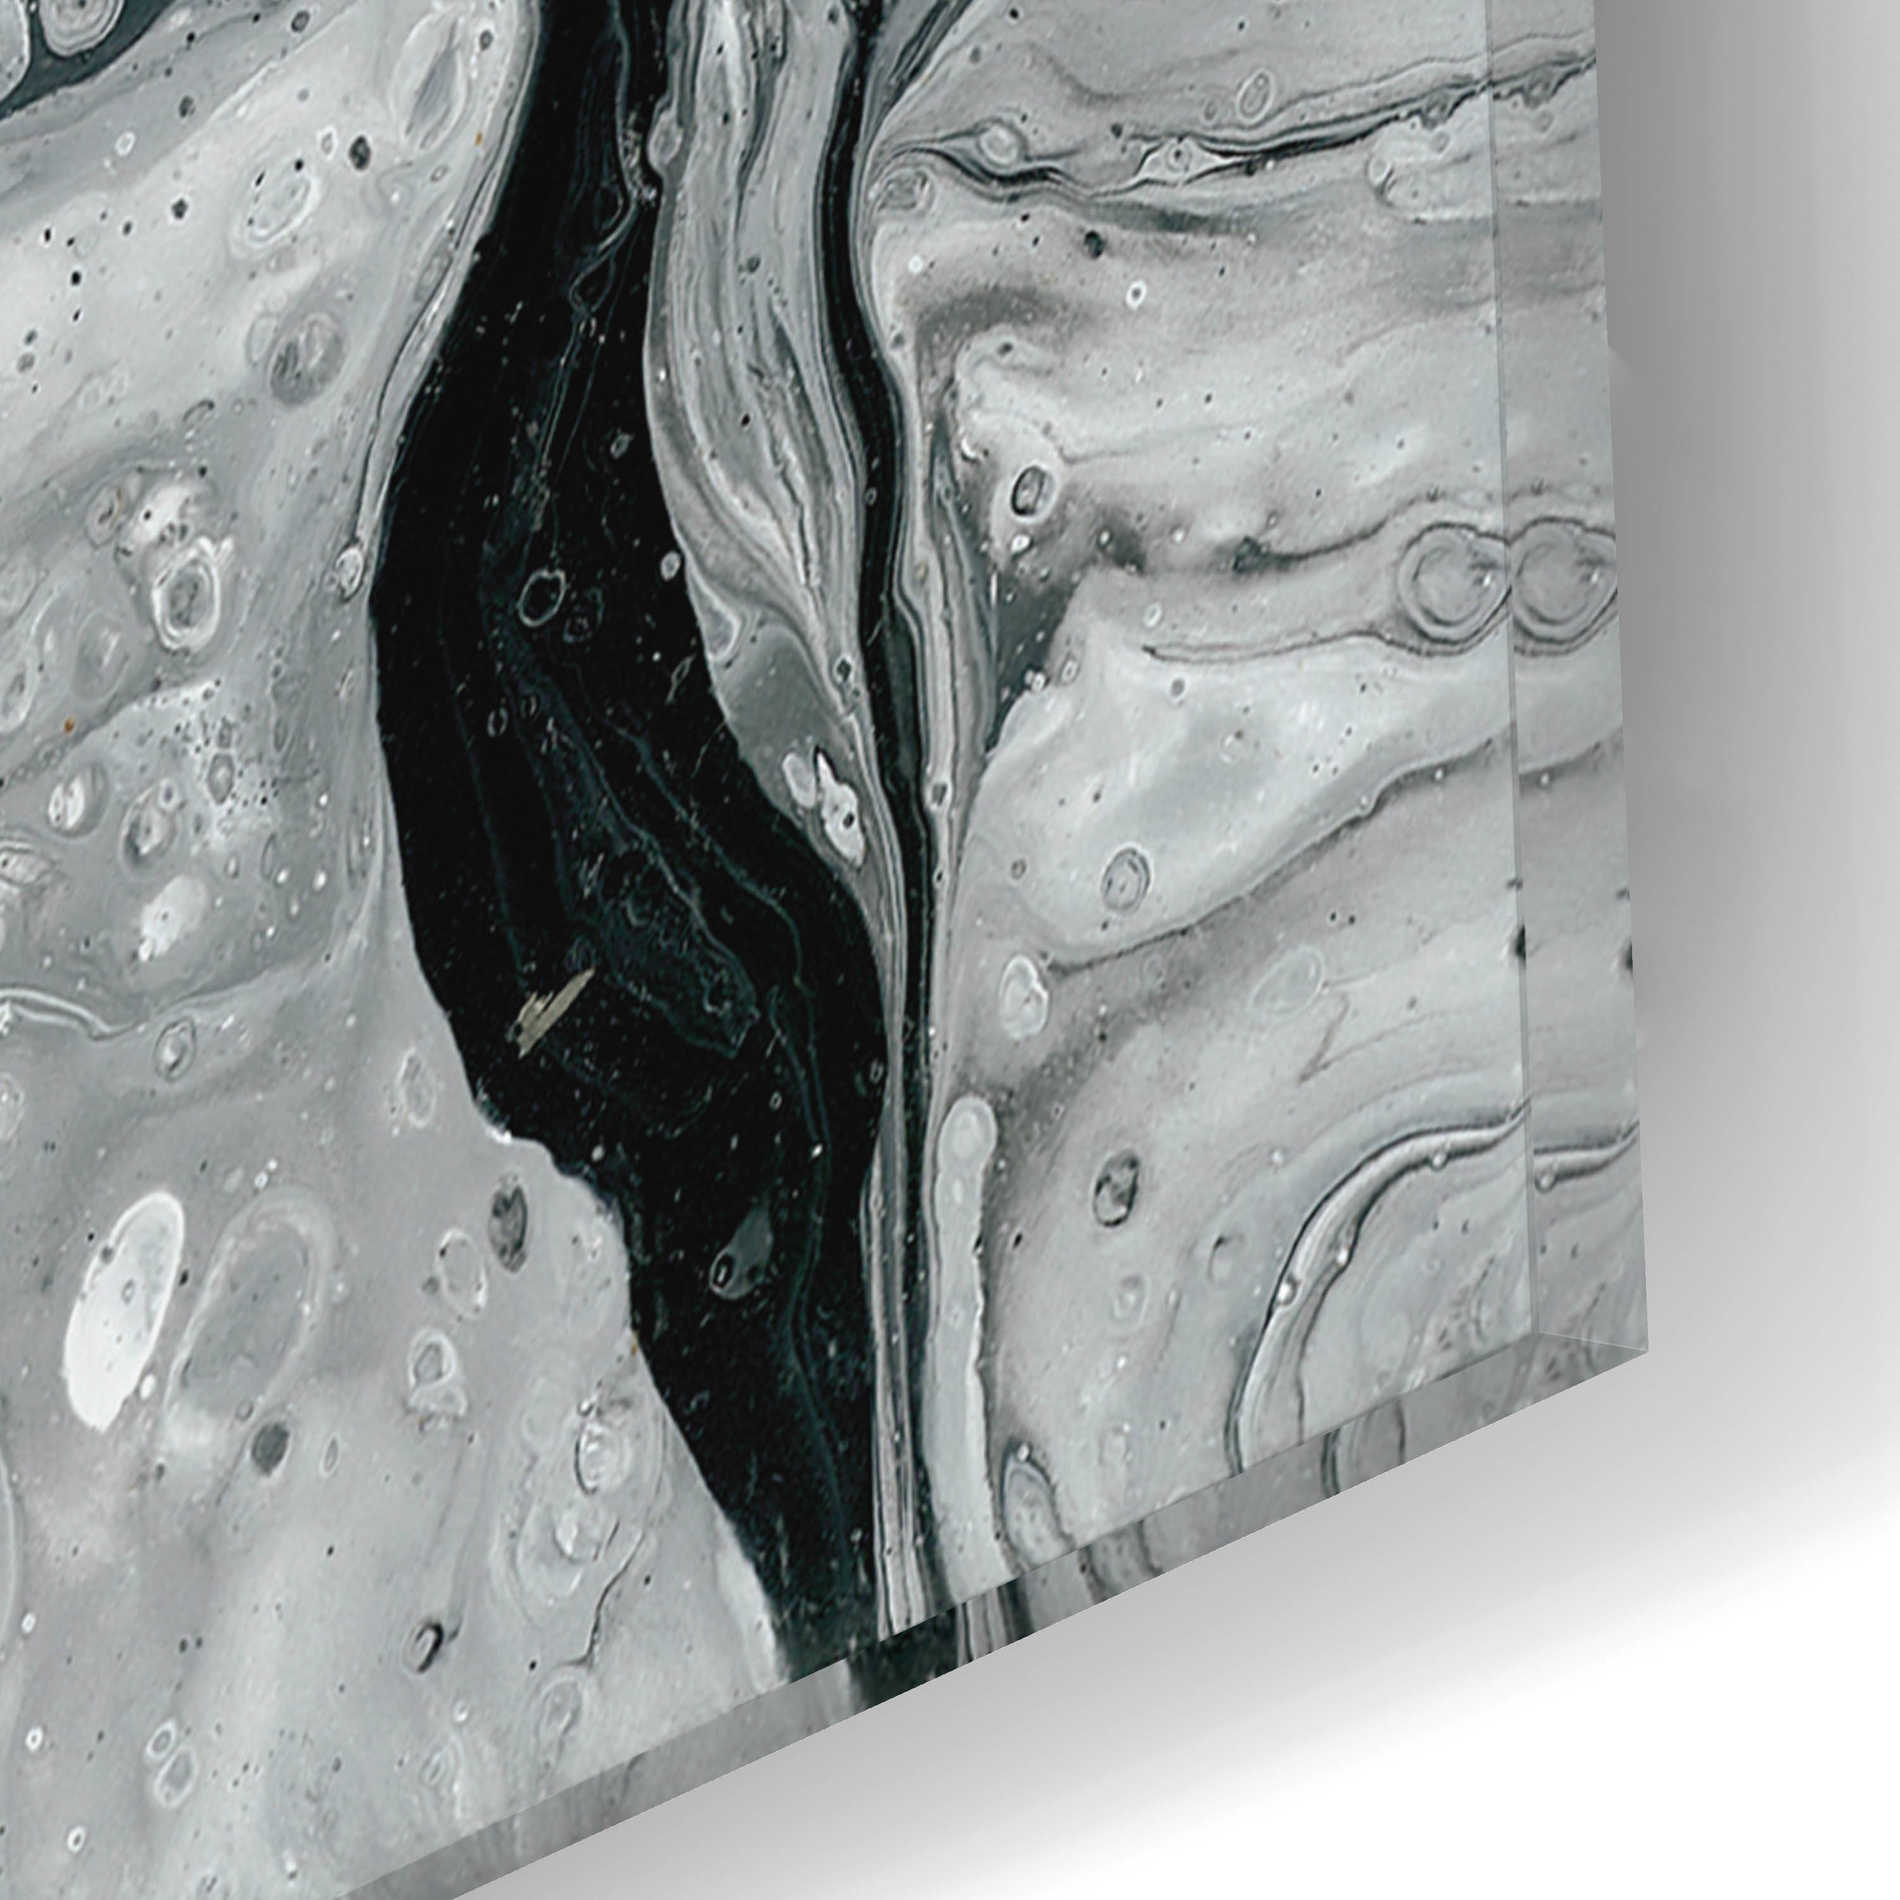 Epic Art 'Abstract in Gray V' by Cindy Jacobs, Acrylic Glass Wall Art,12x12